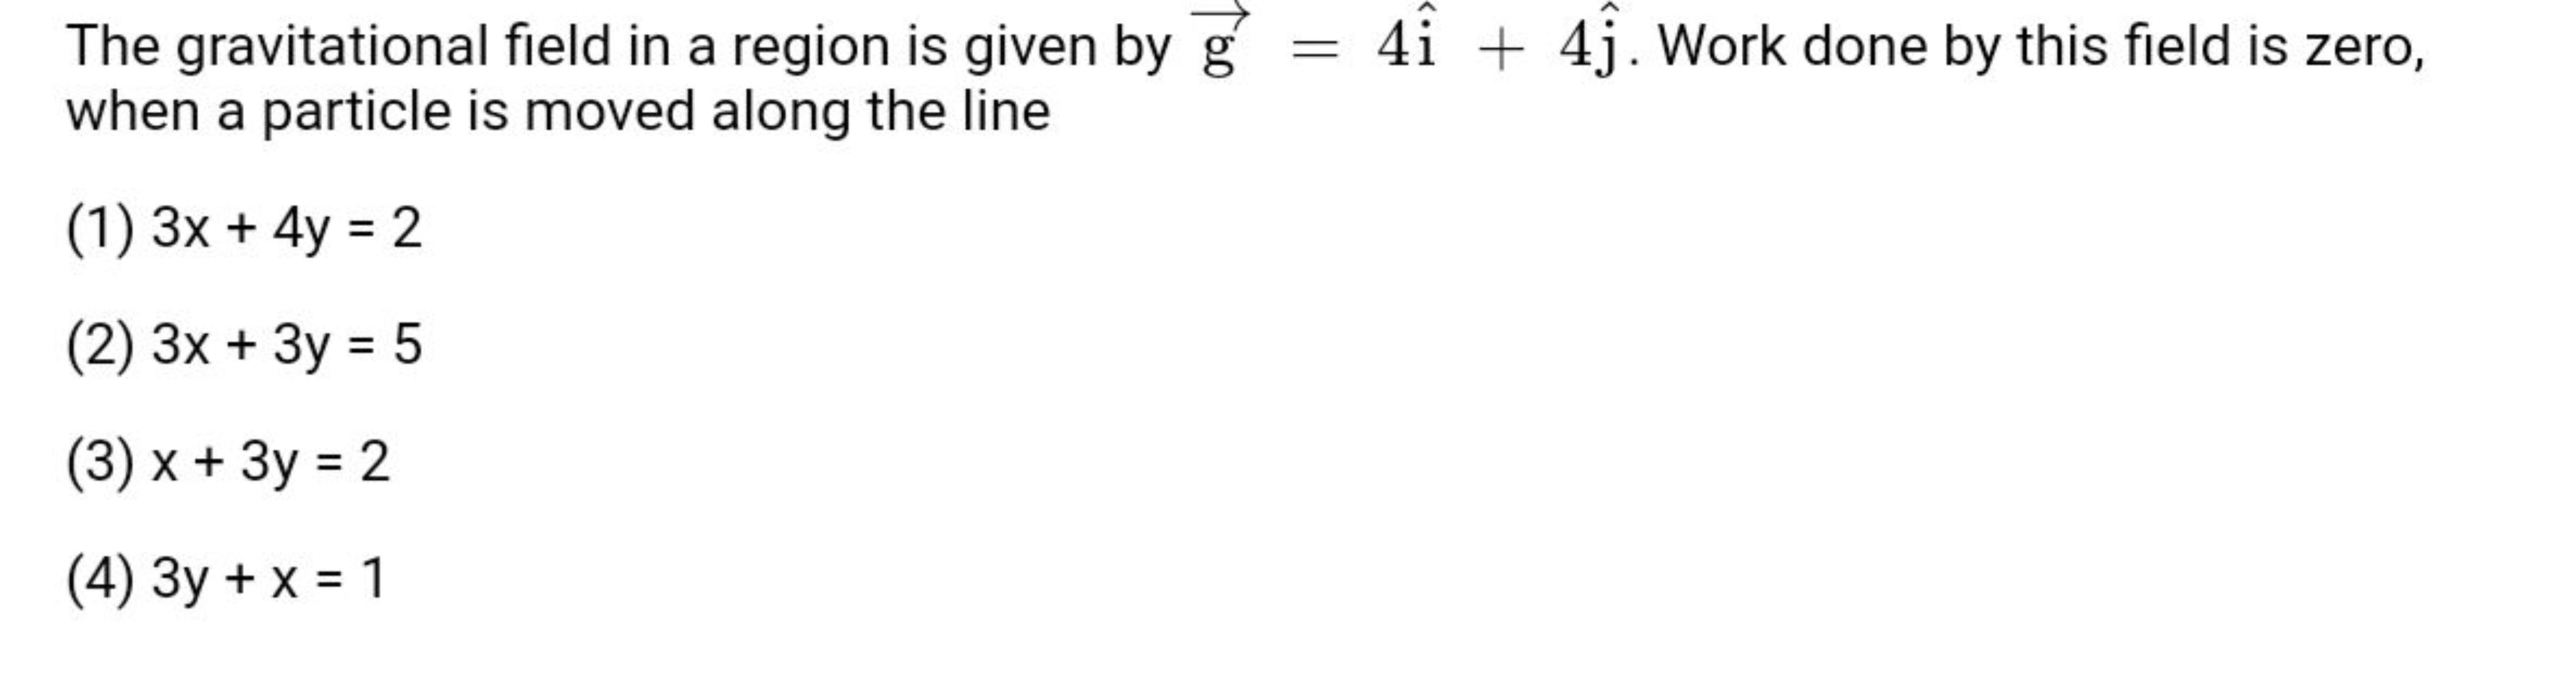 The gravitational field in a region is given by g​=4i^+4j^​. Work done